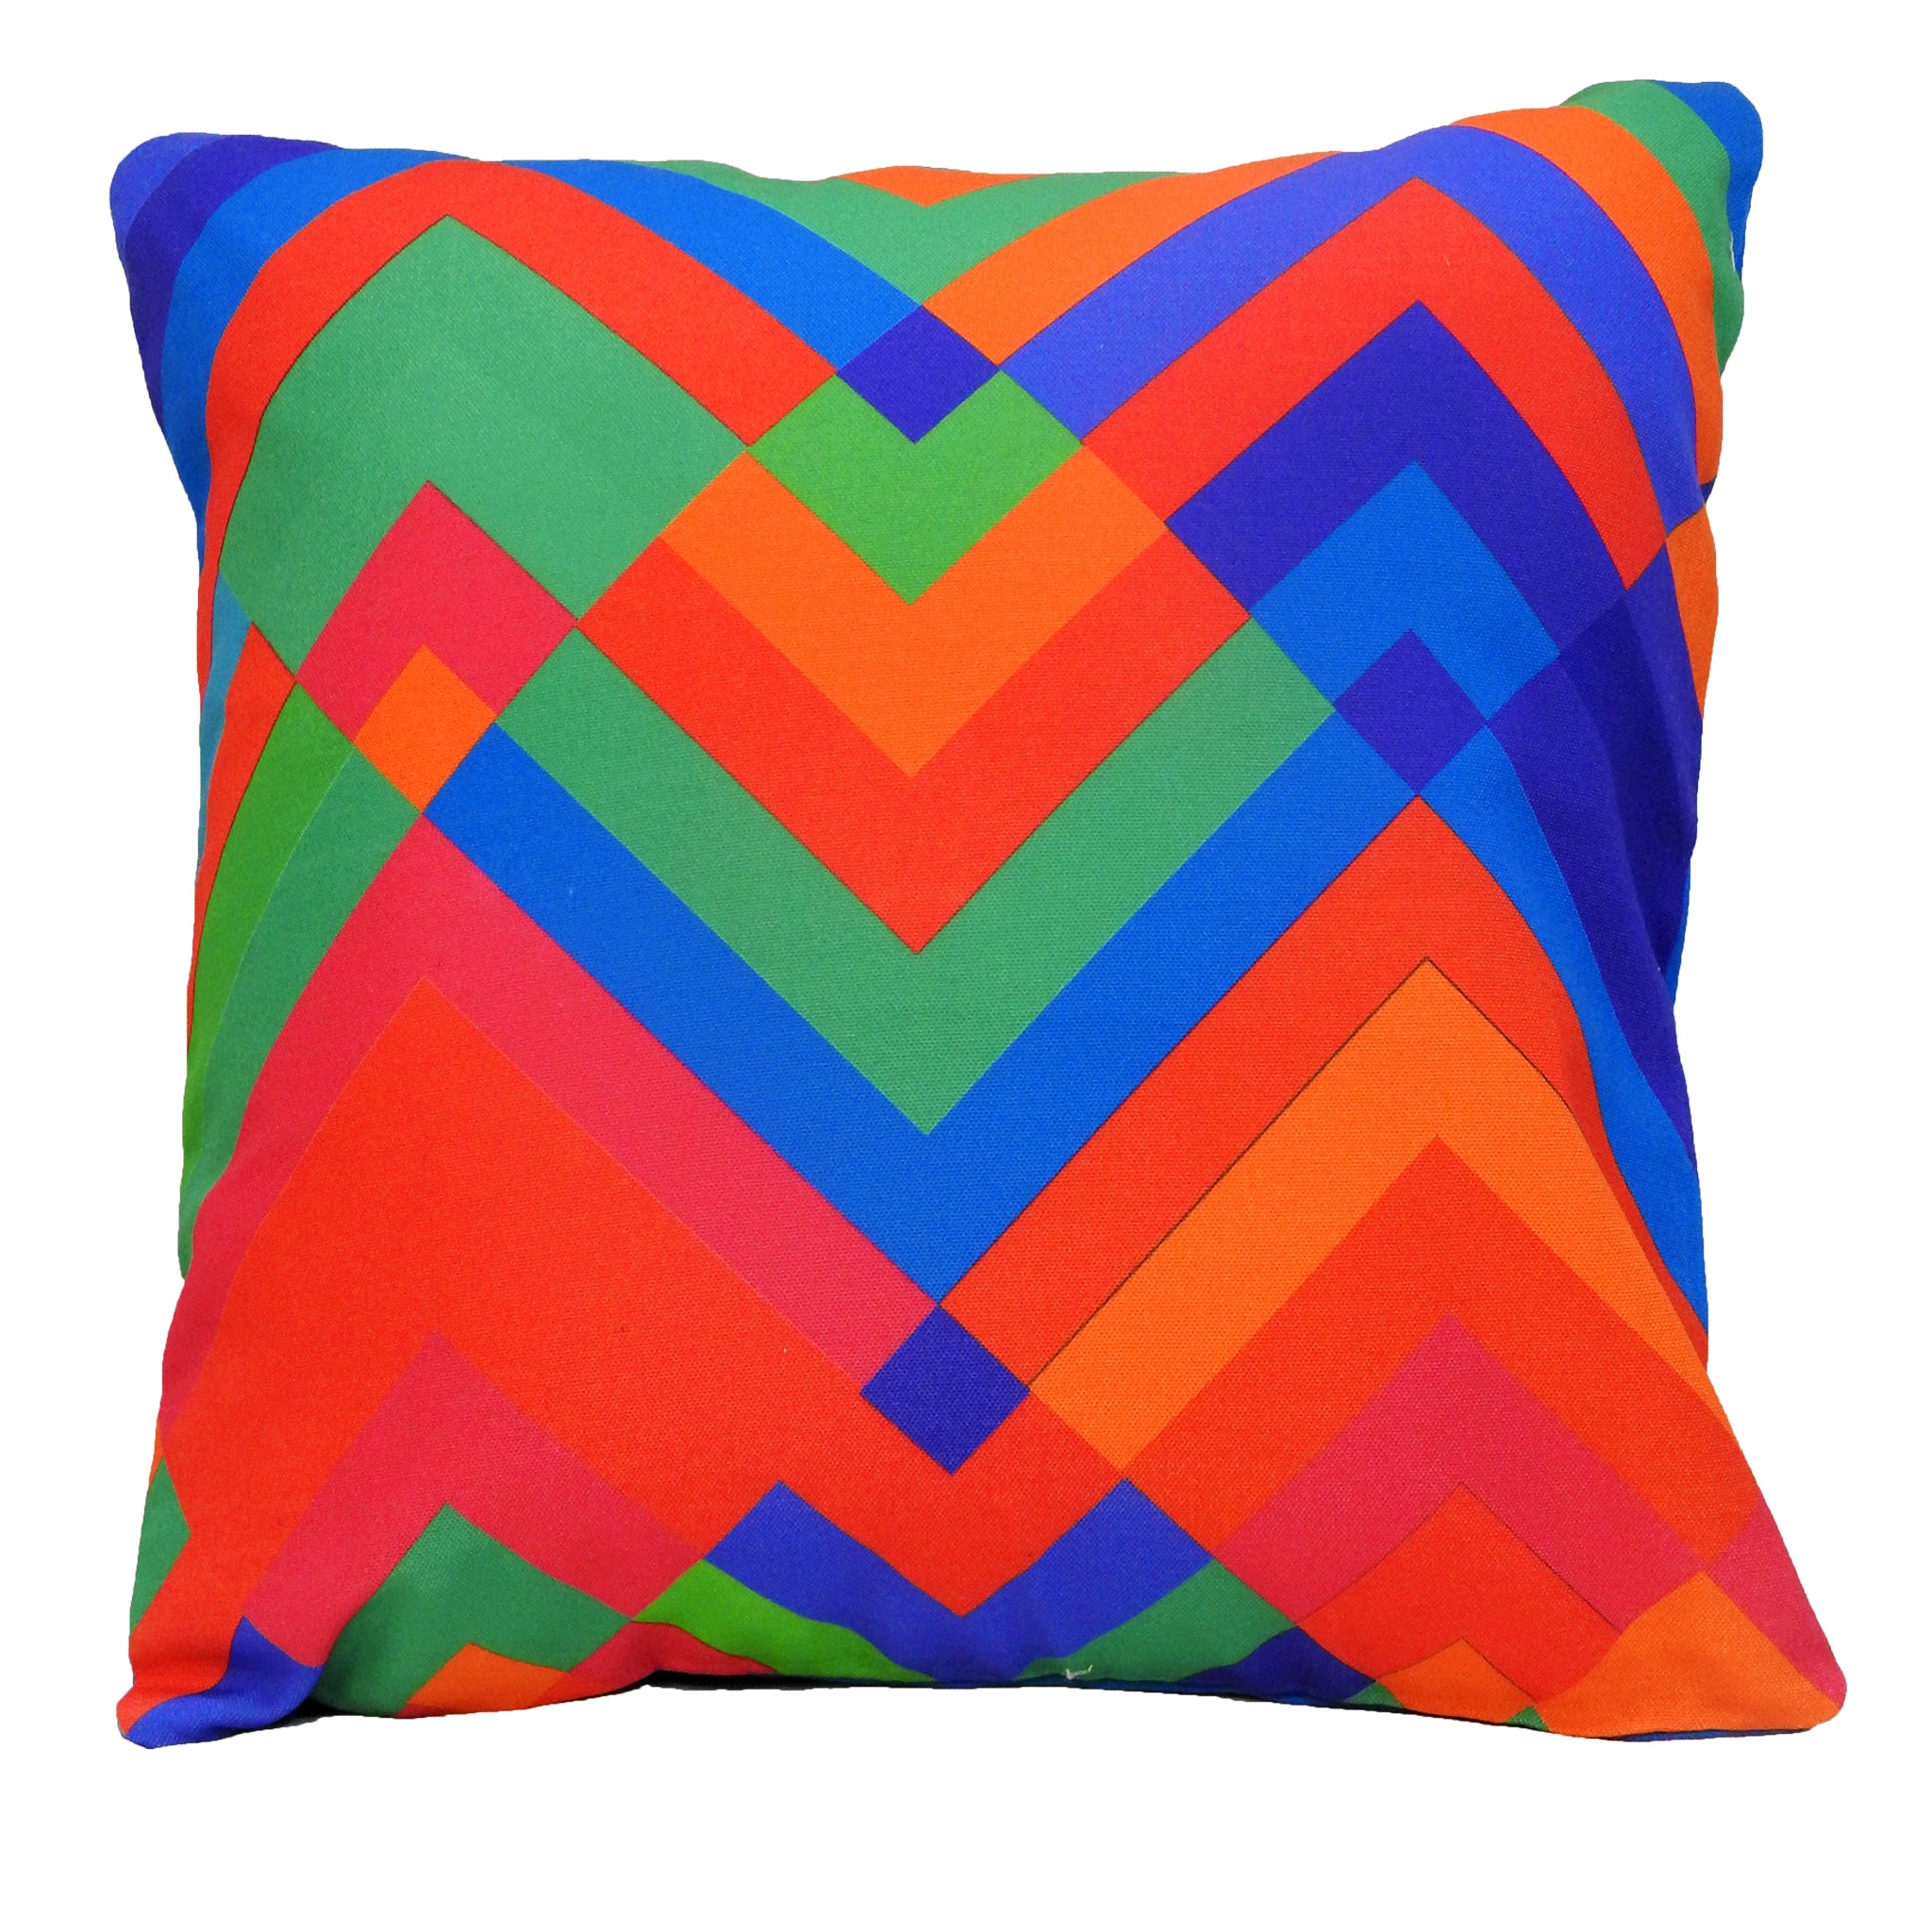 aztec-print-cushion-cover-for-home